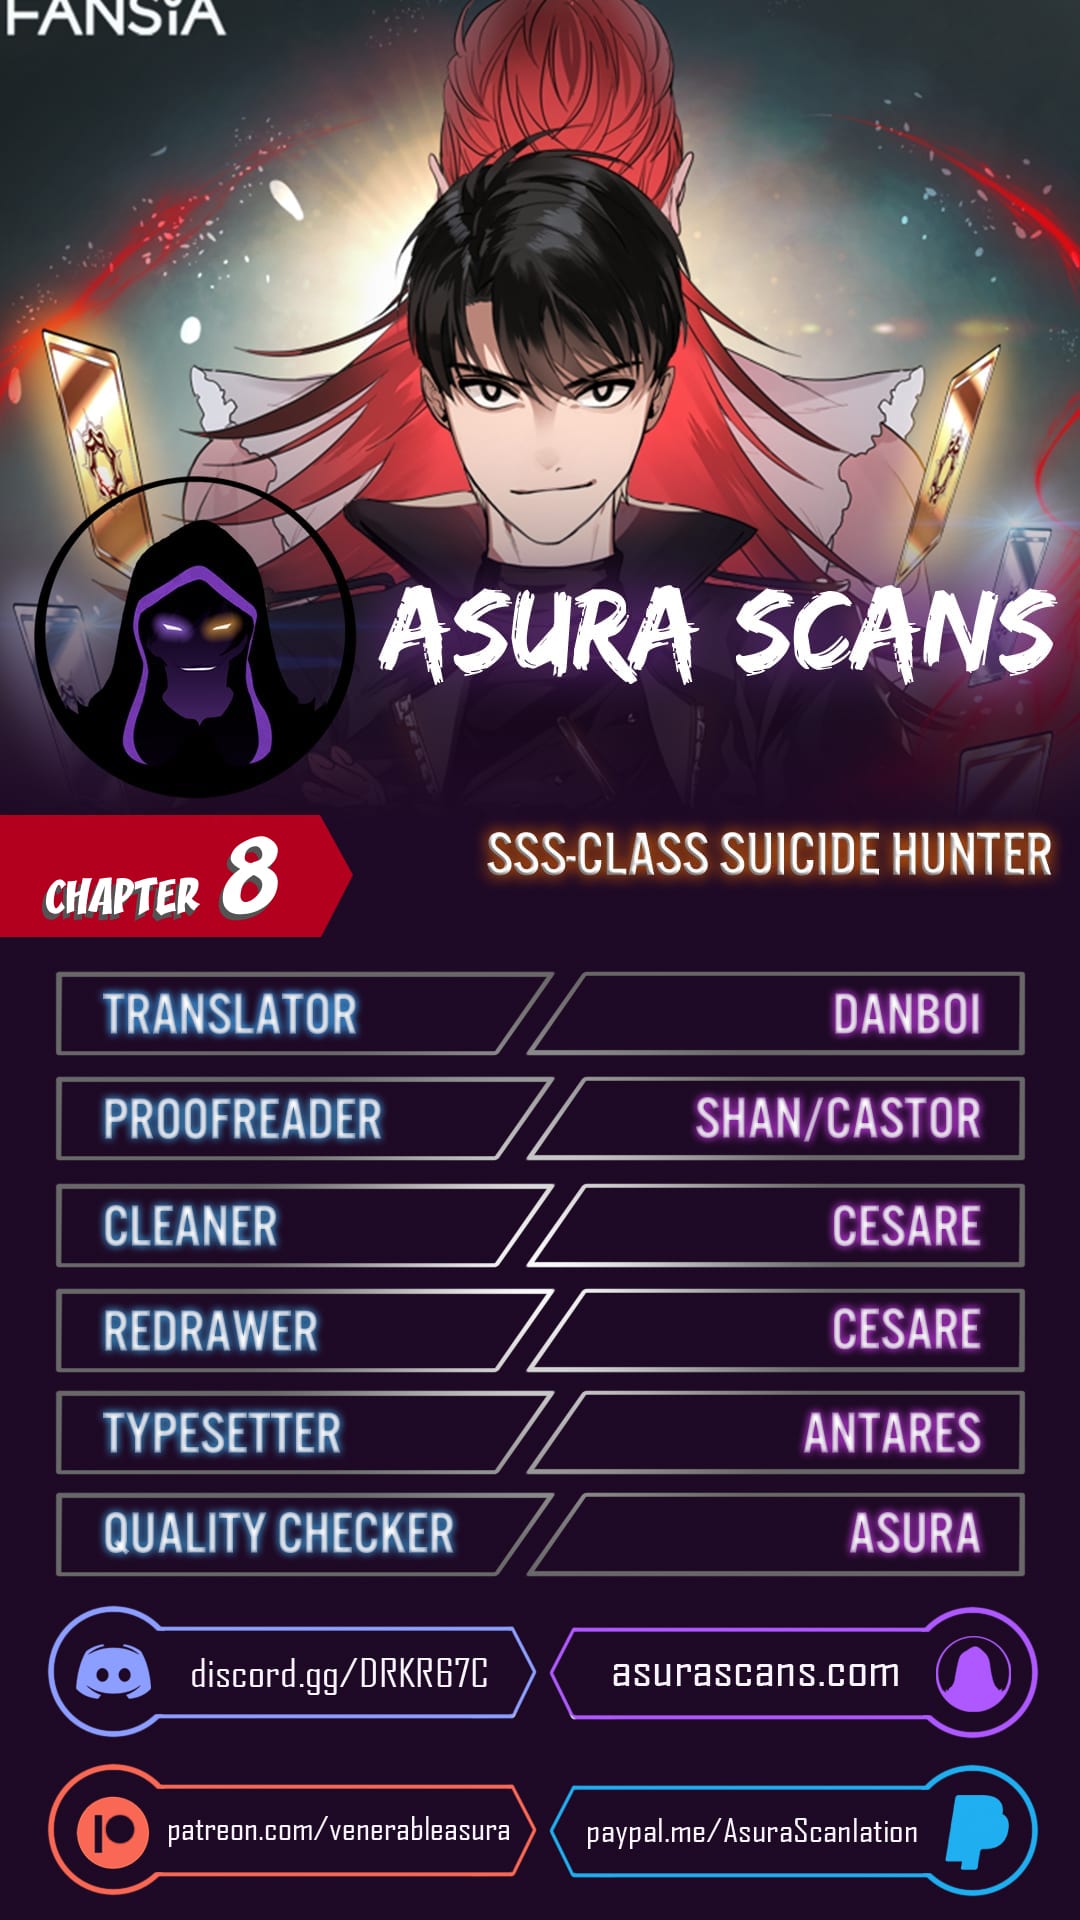 SSS-Class Suicide Hunter chapter 8